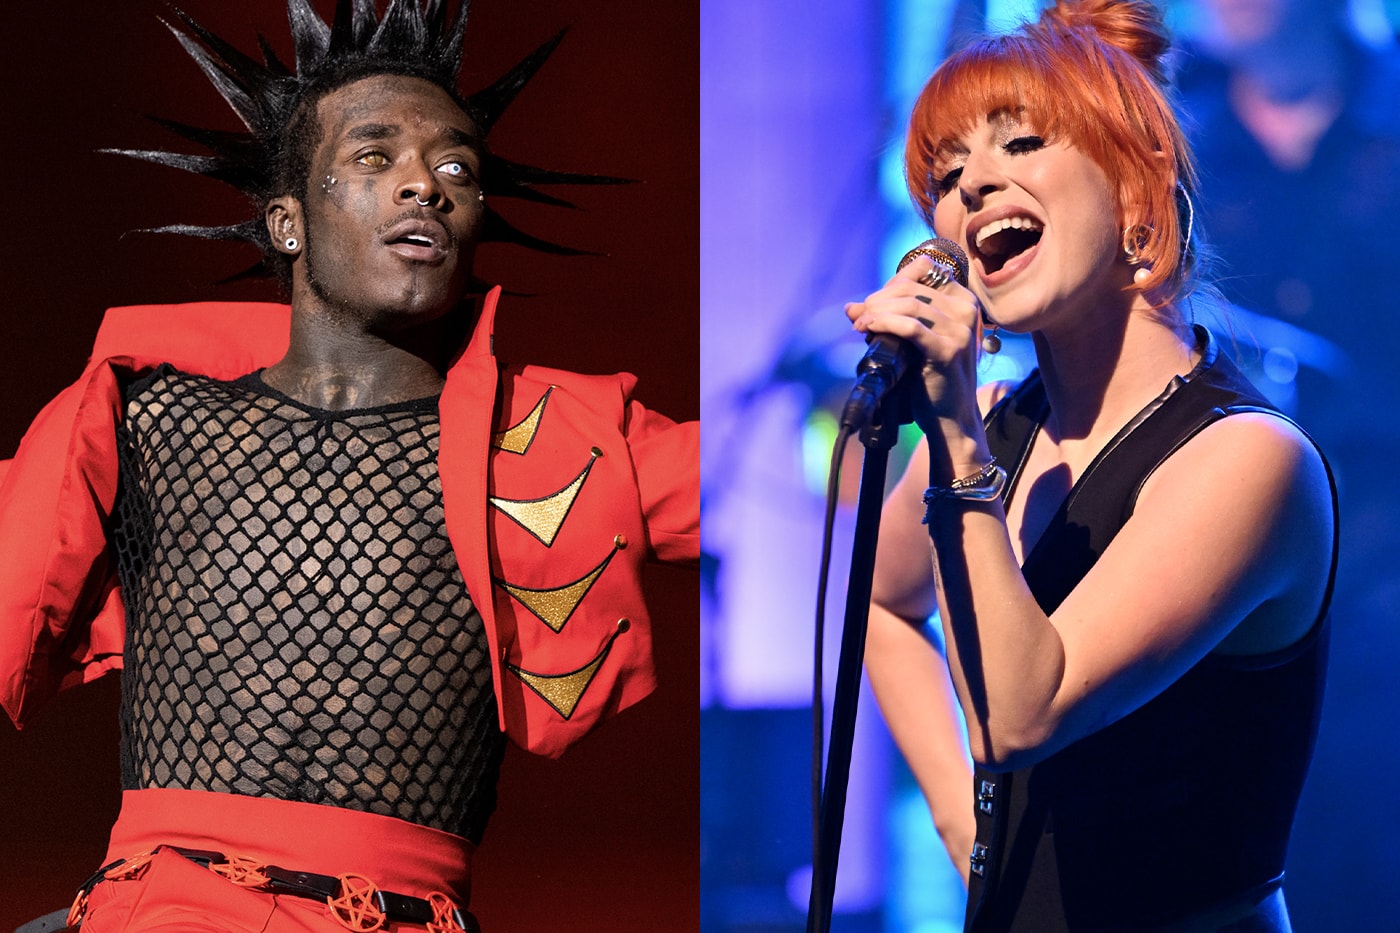 The Playlist: Paramore Steps Into a New Era, and More New Songs